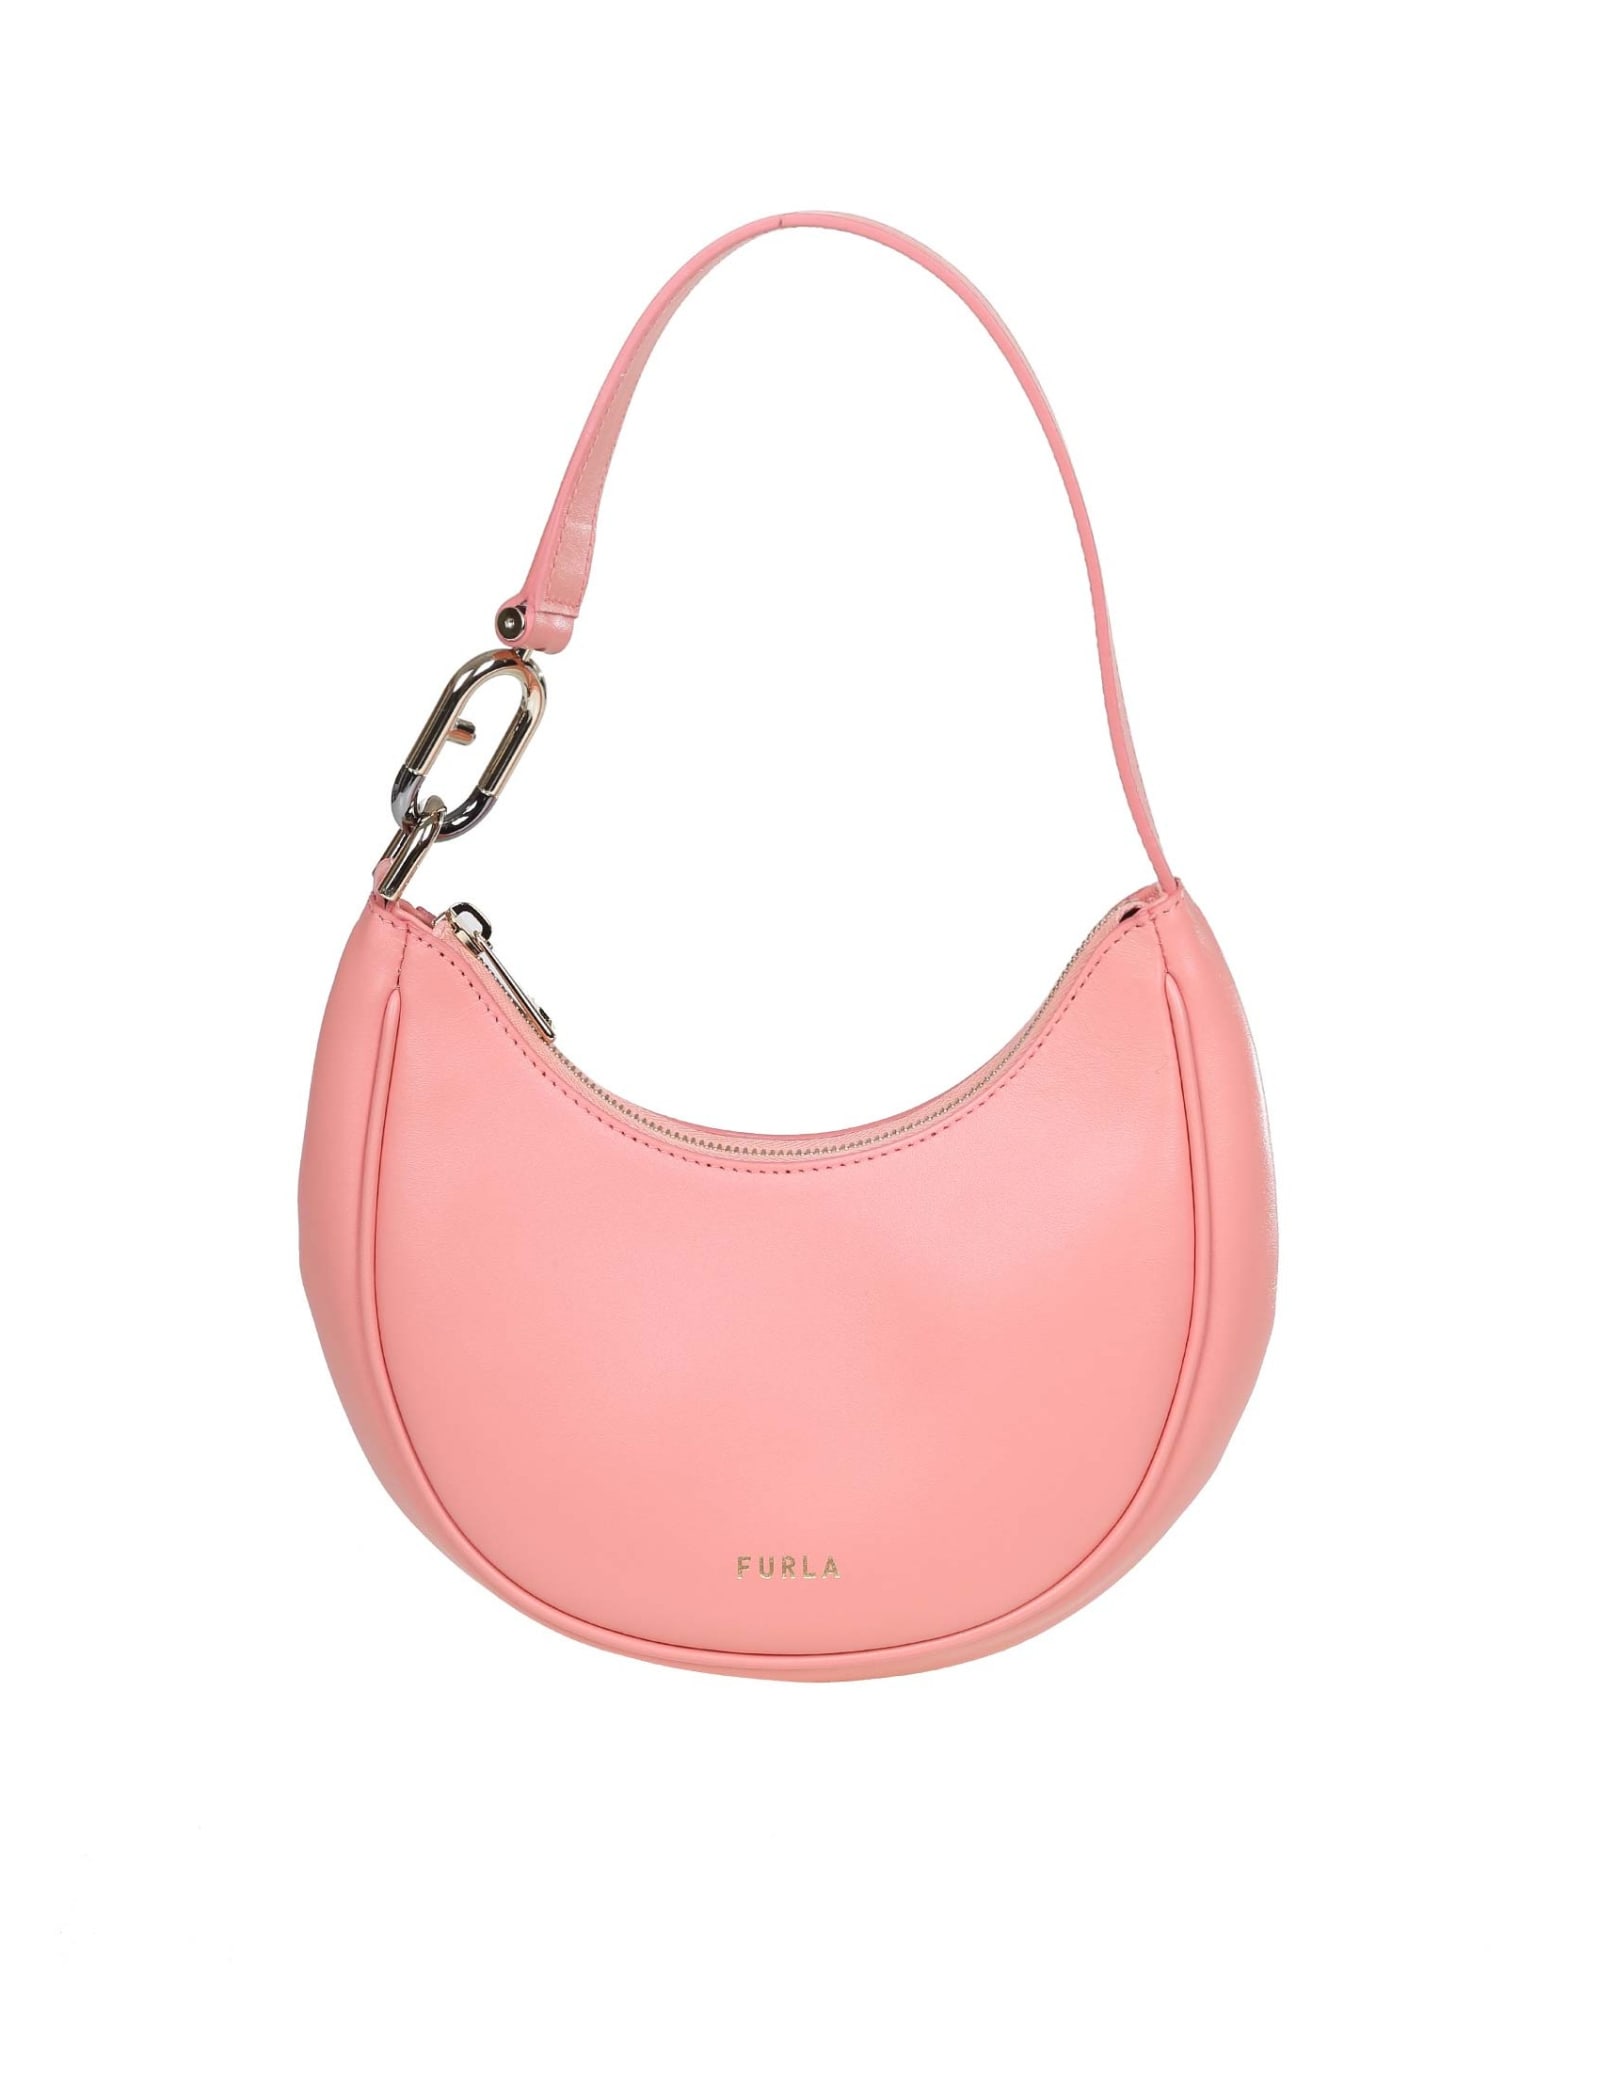 Furla Spring S Shoulder Bag In Peach Colored Leather